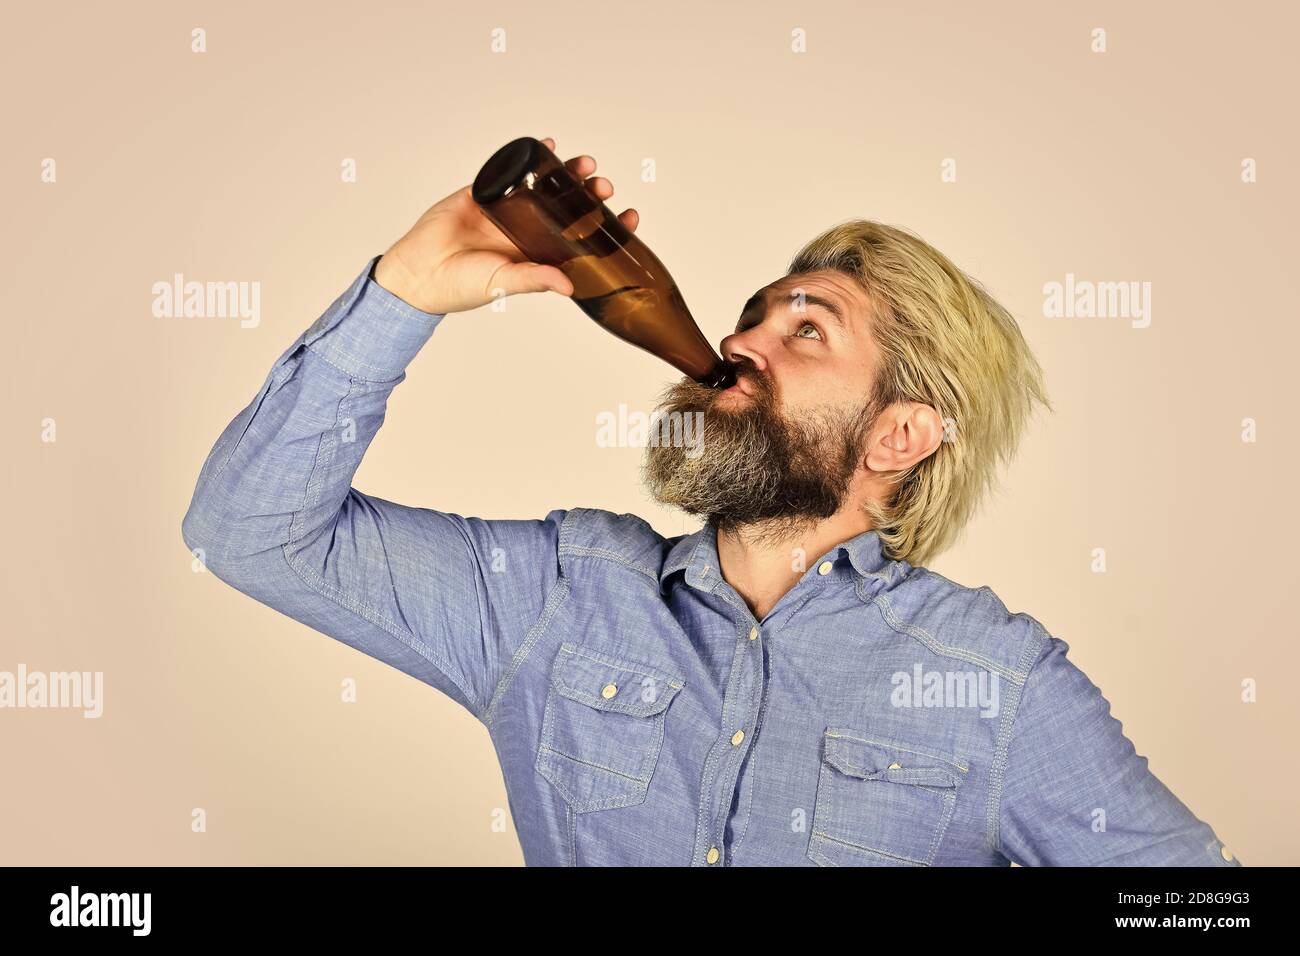 Having alcohol addiction and bad habits. Having fun. Hangover syndrome.  Alcoholism problem. Drunk man. Alcoholic guy. Refreshing alcoholic drink.  Alcohol addict. Man with tousled hair looks unhealthy Stock Photo - Alamy